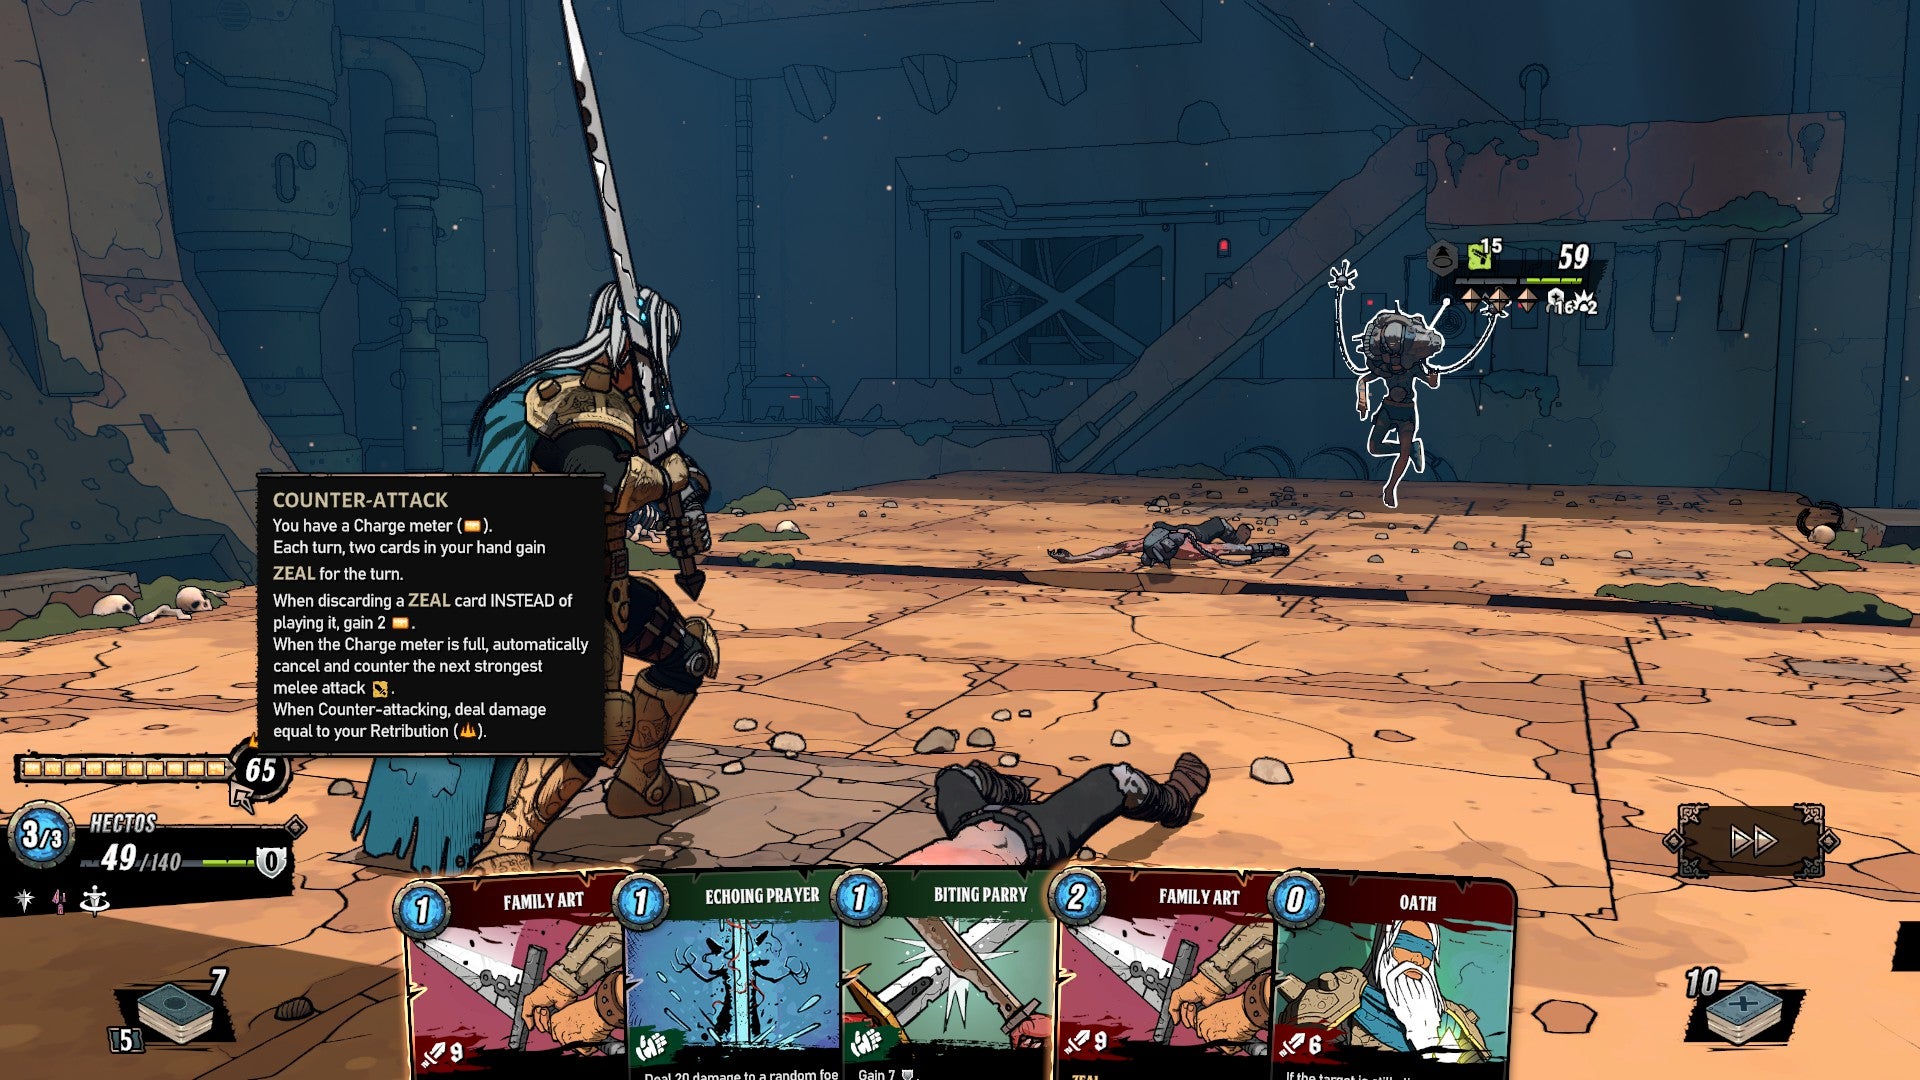 An armoured, two-handed sword-wielding character faces off against a floating enemy in a narrow, but long, space.